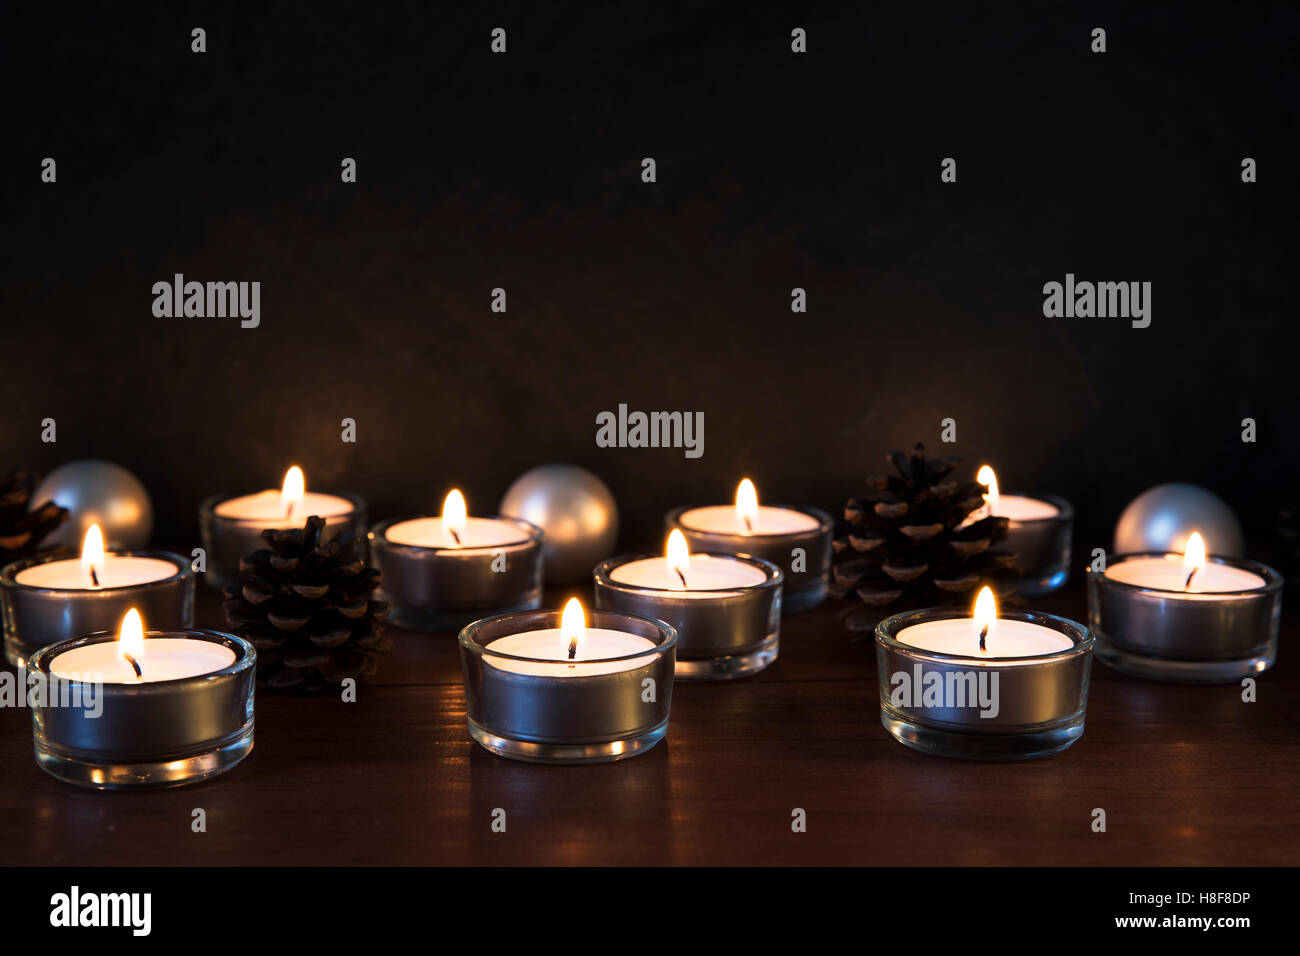 Tea lights with pine cones and baubles on a wooden surface, with copy space. Stock Photo